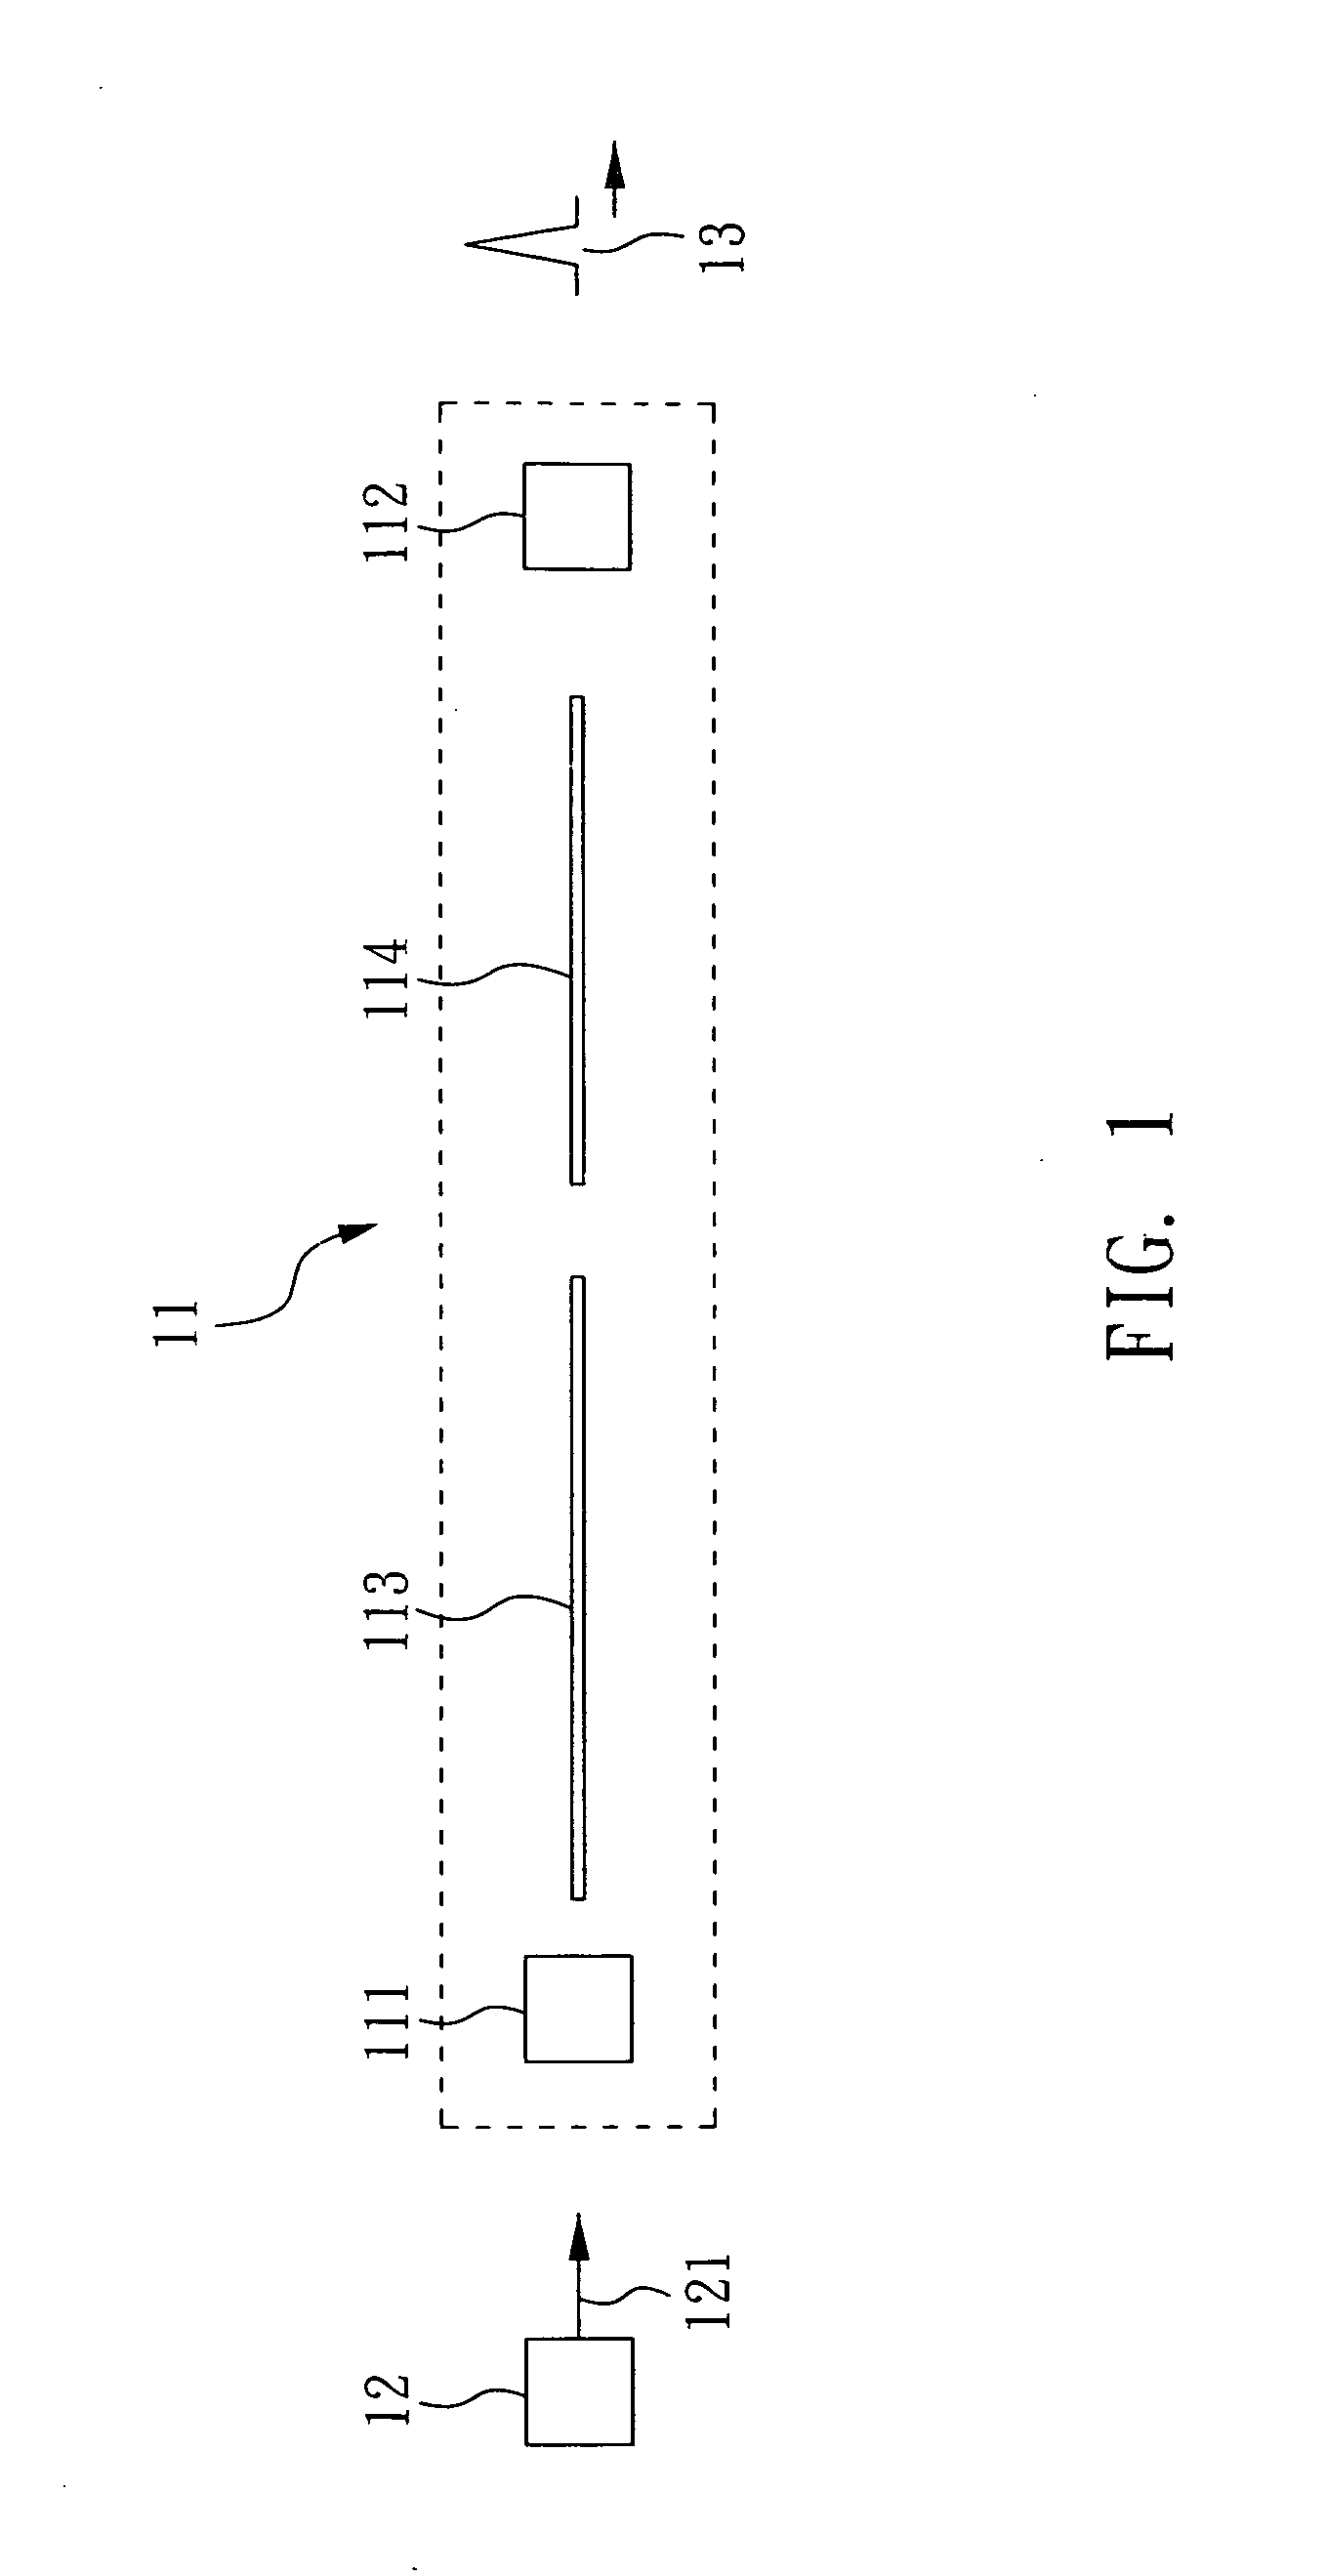 Pulsed laser system with a thulium-doped saturable absorber Q-switch